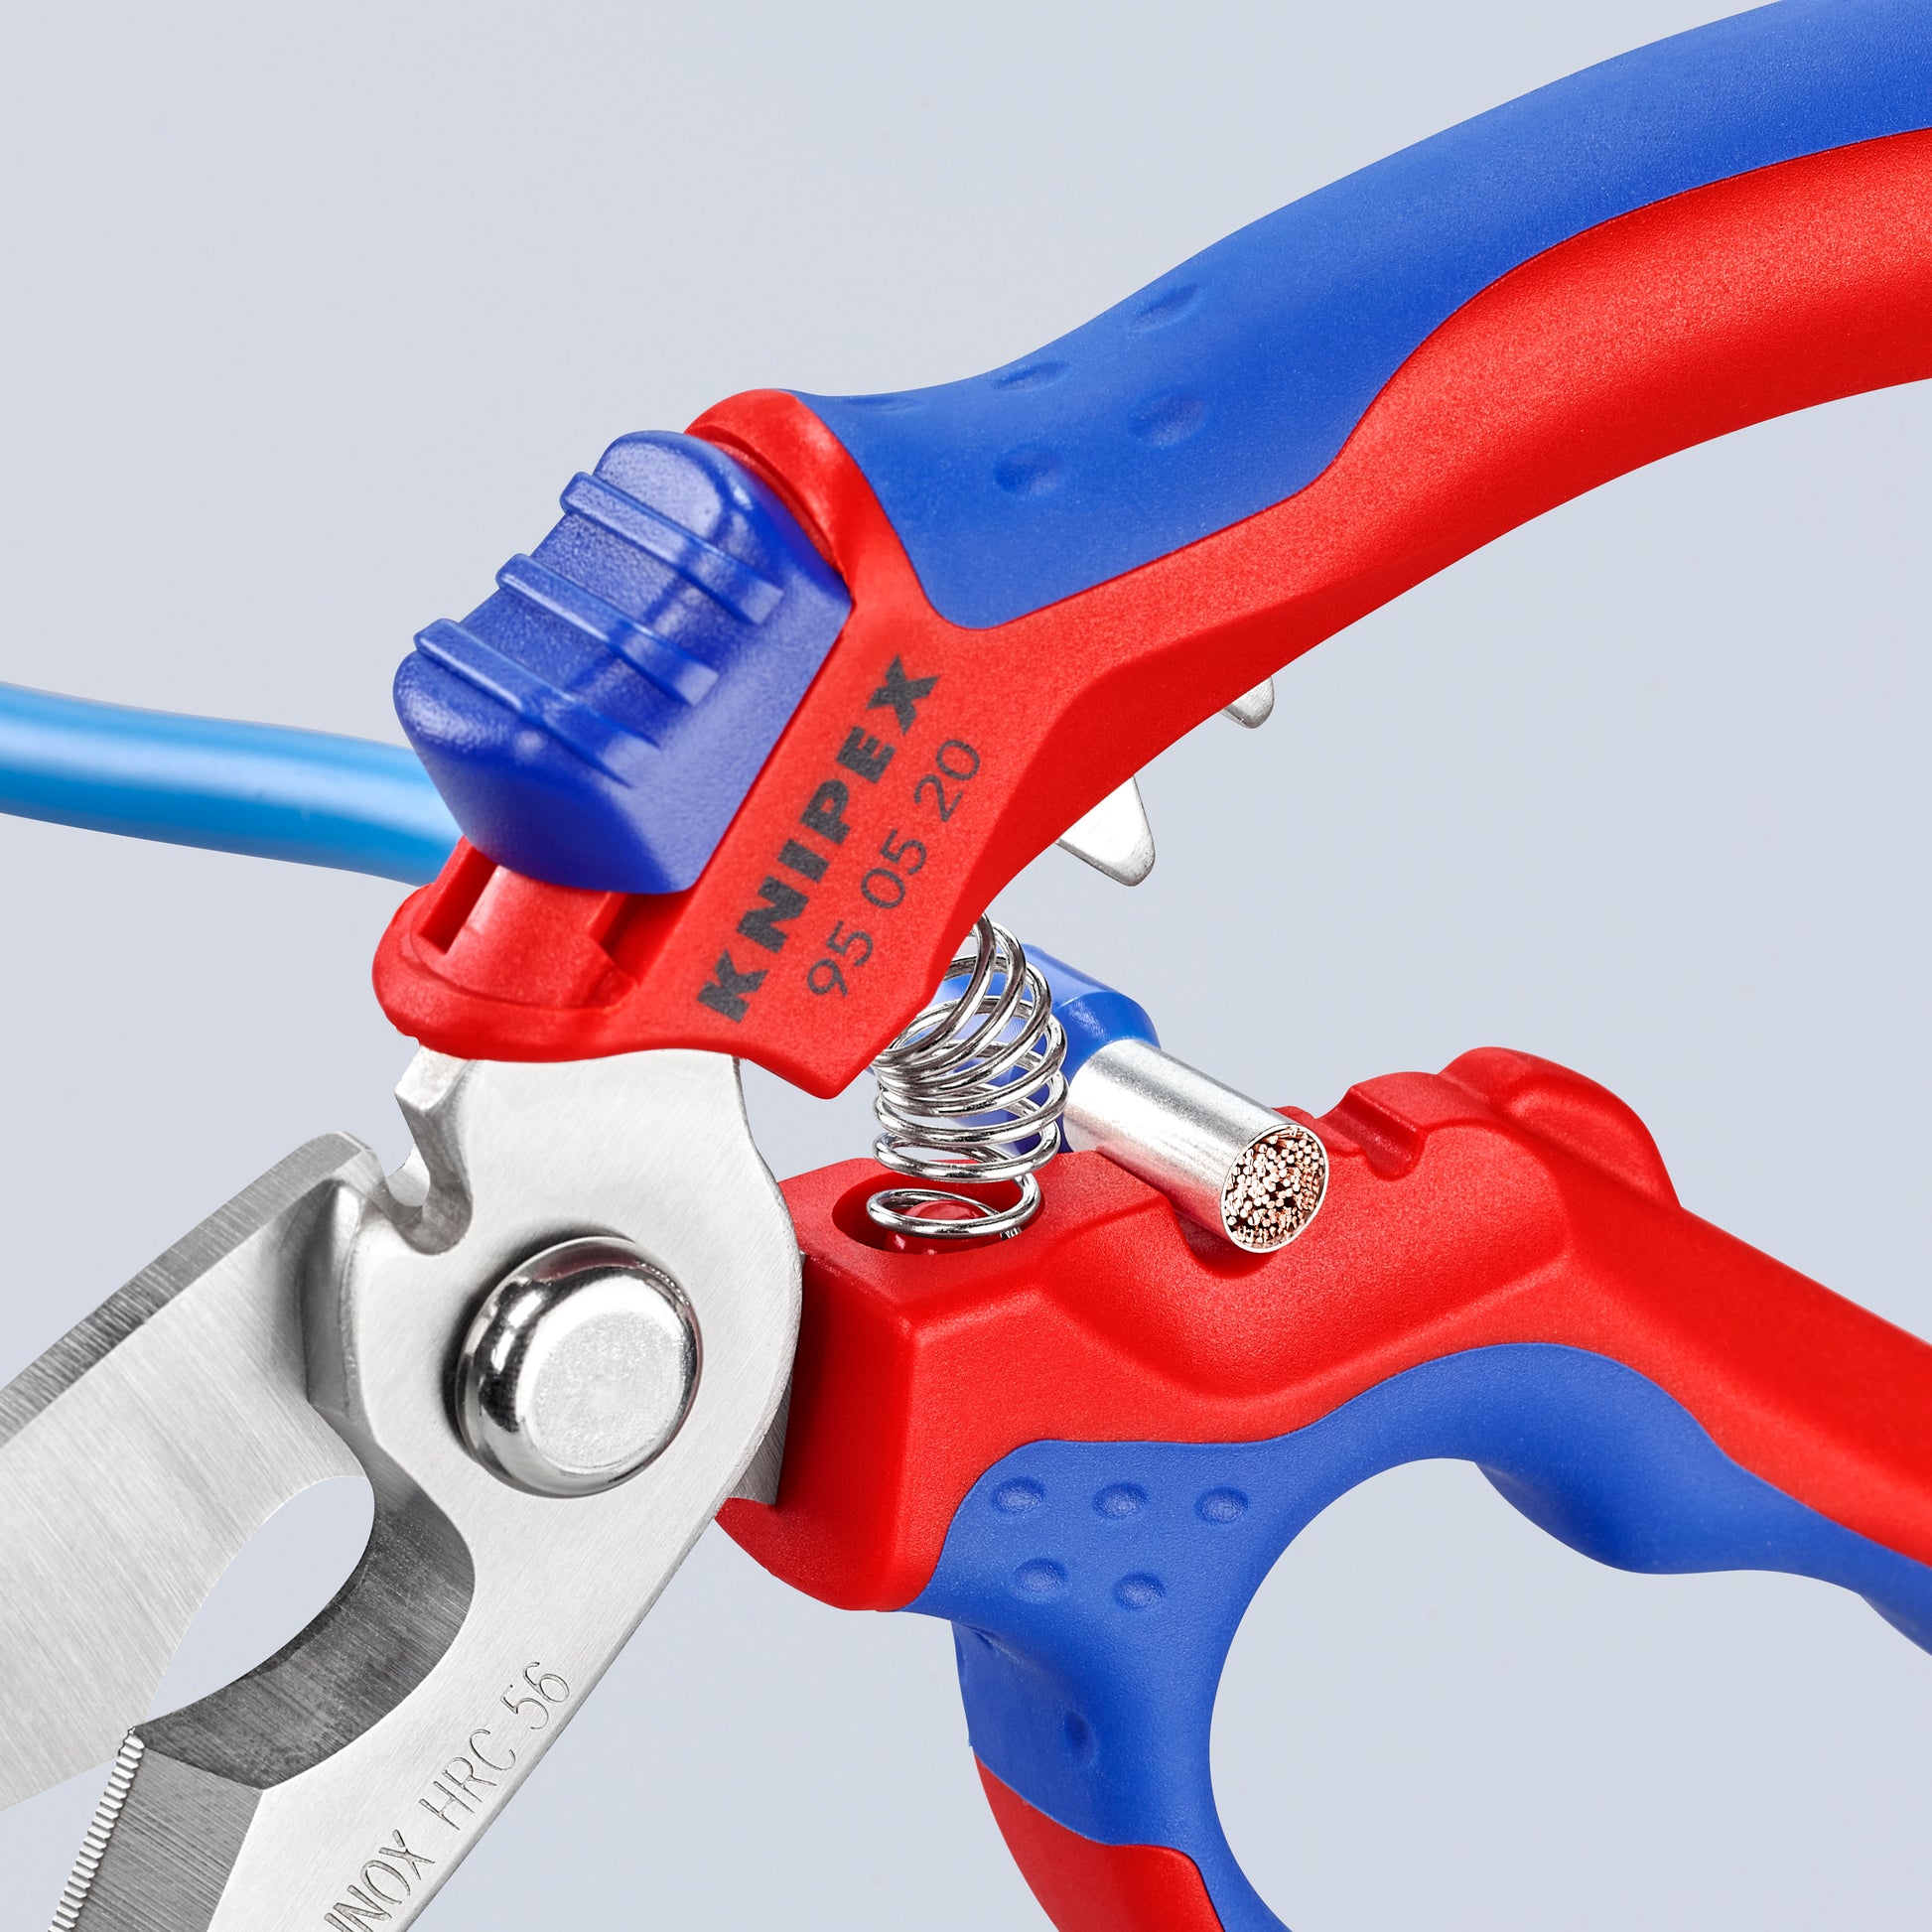 Knipex Electricians Shears / Scissors ✂️ - The NEW tool bag